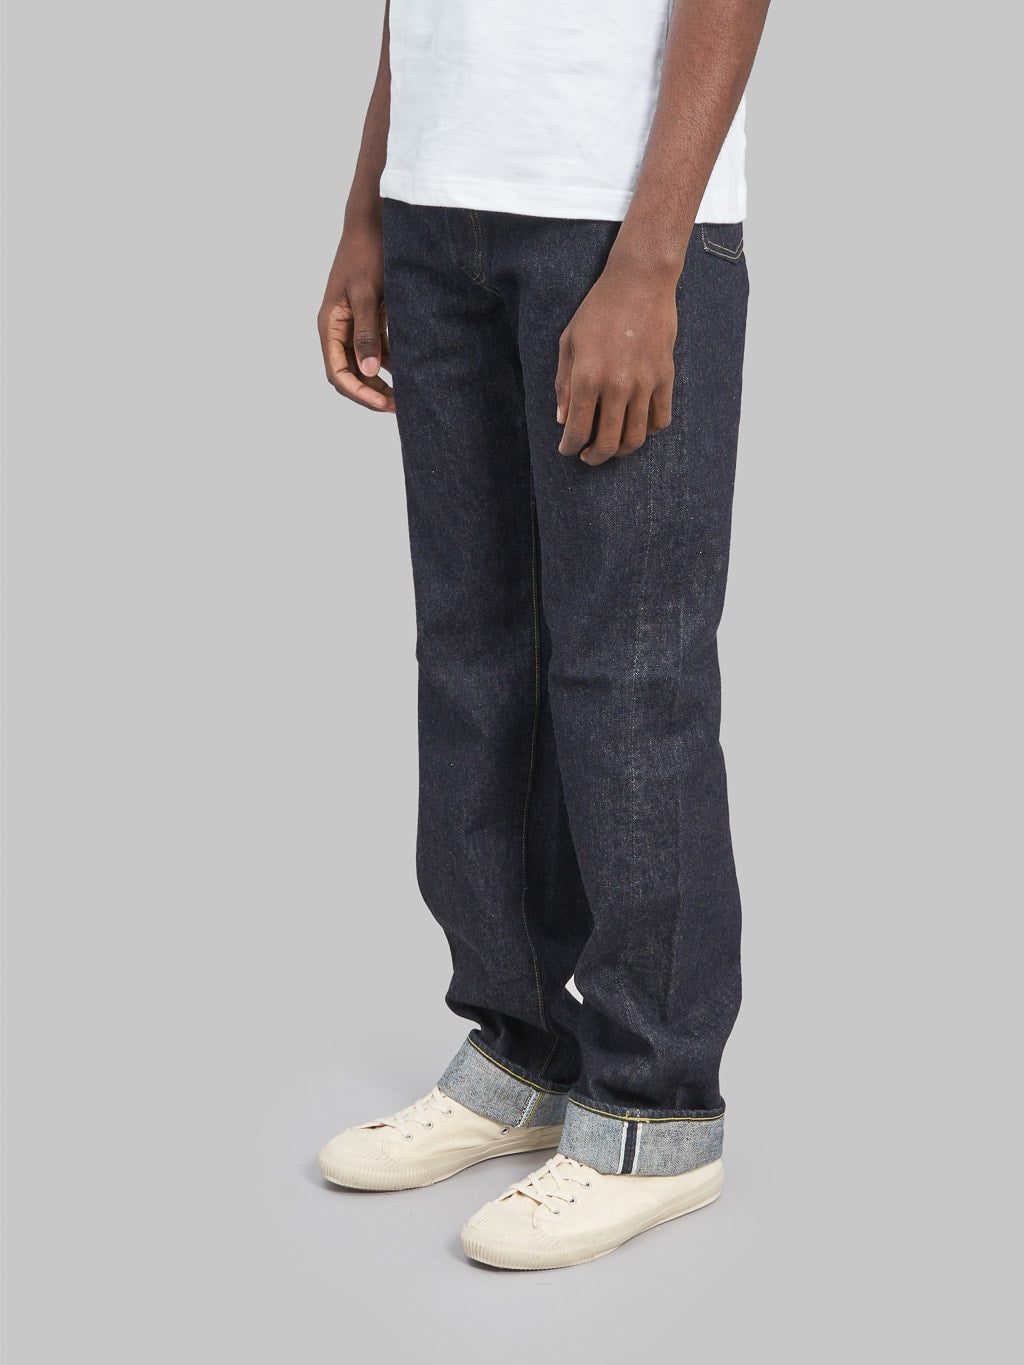 tcb s40s regular straight jeans side fit